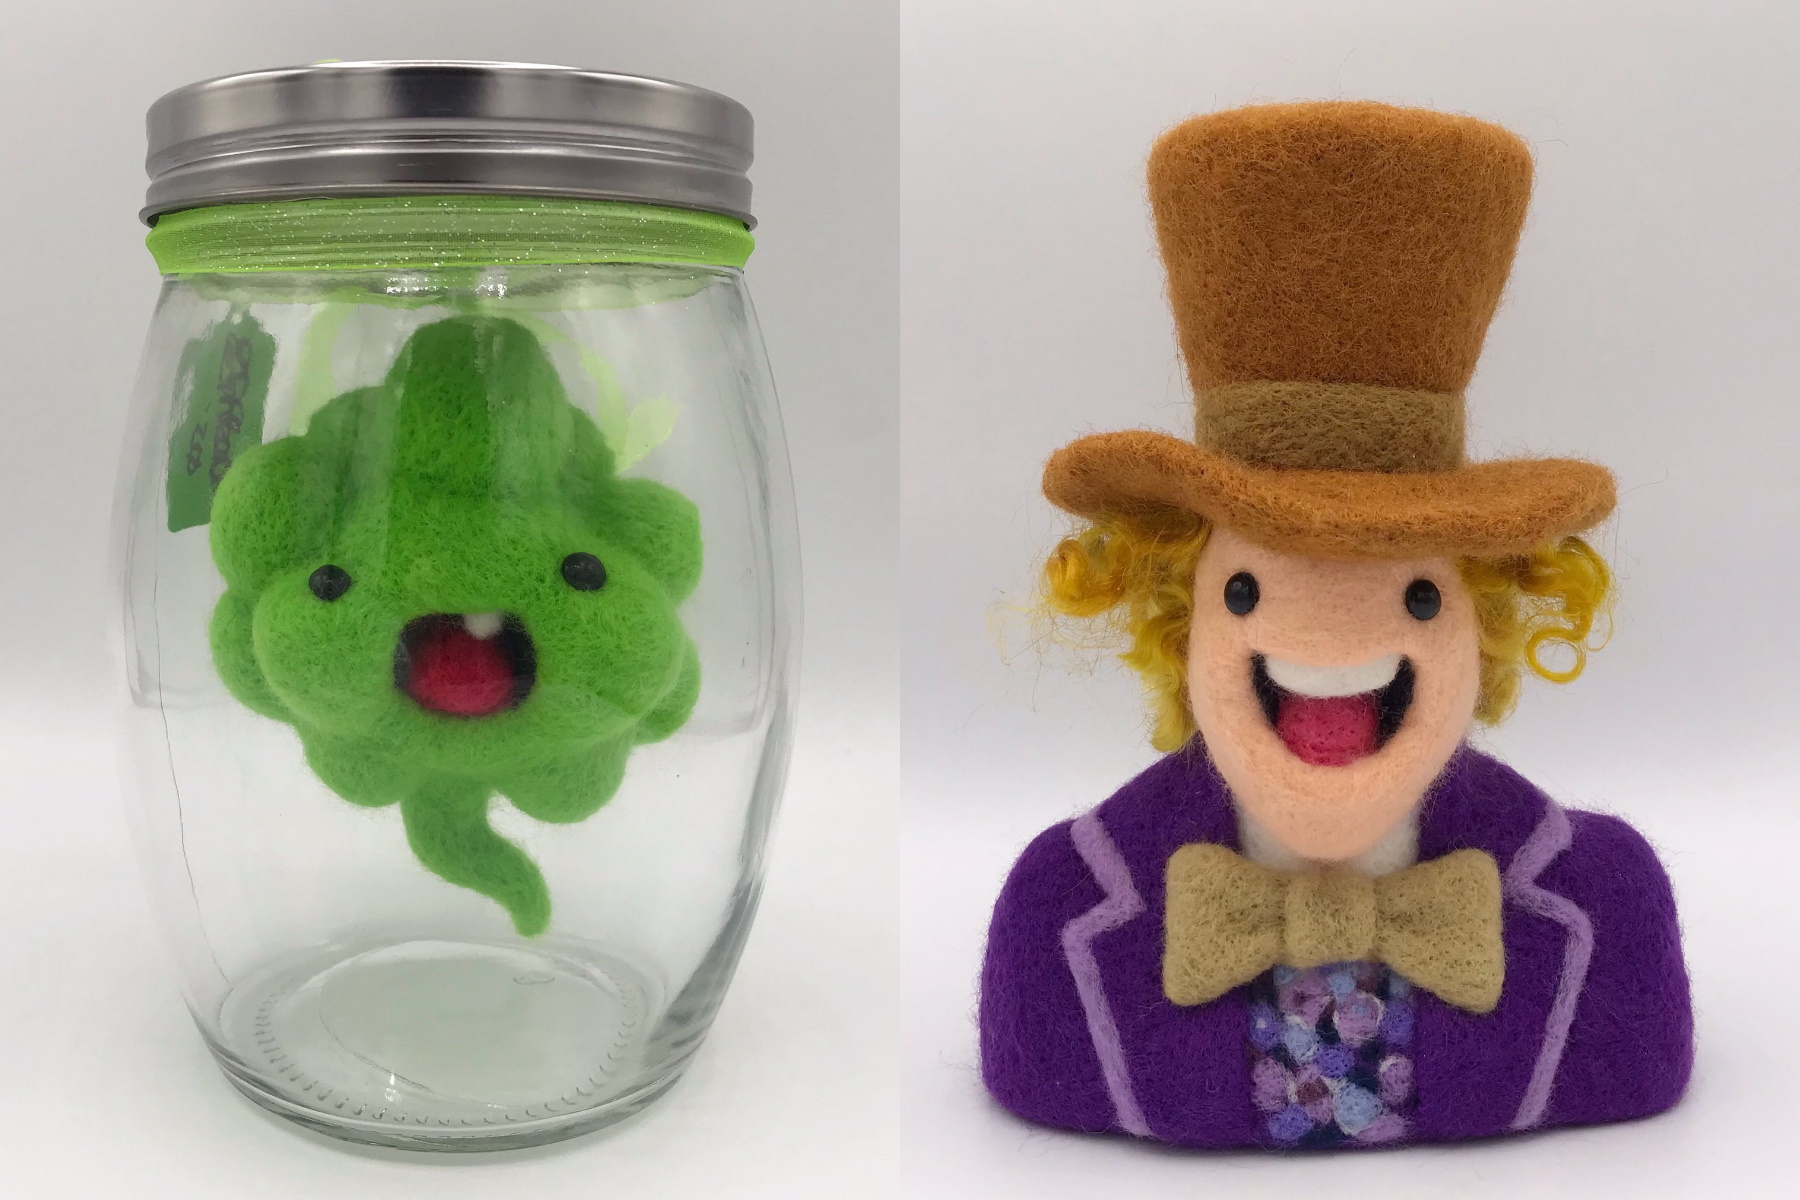 Ed Mironiuk’s needle-felted farts and cute characters will brighten your day